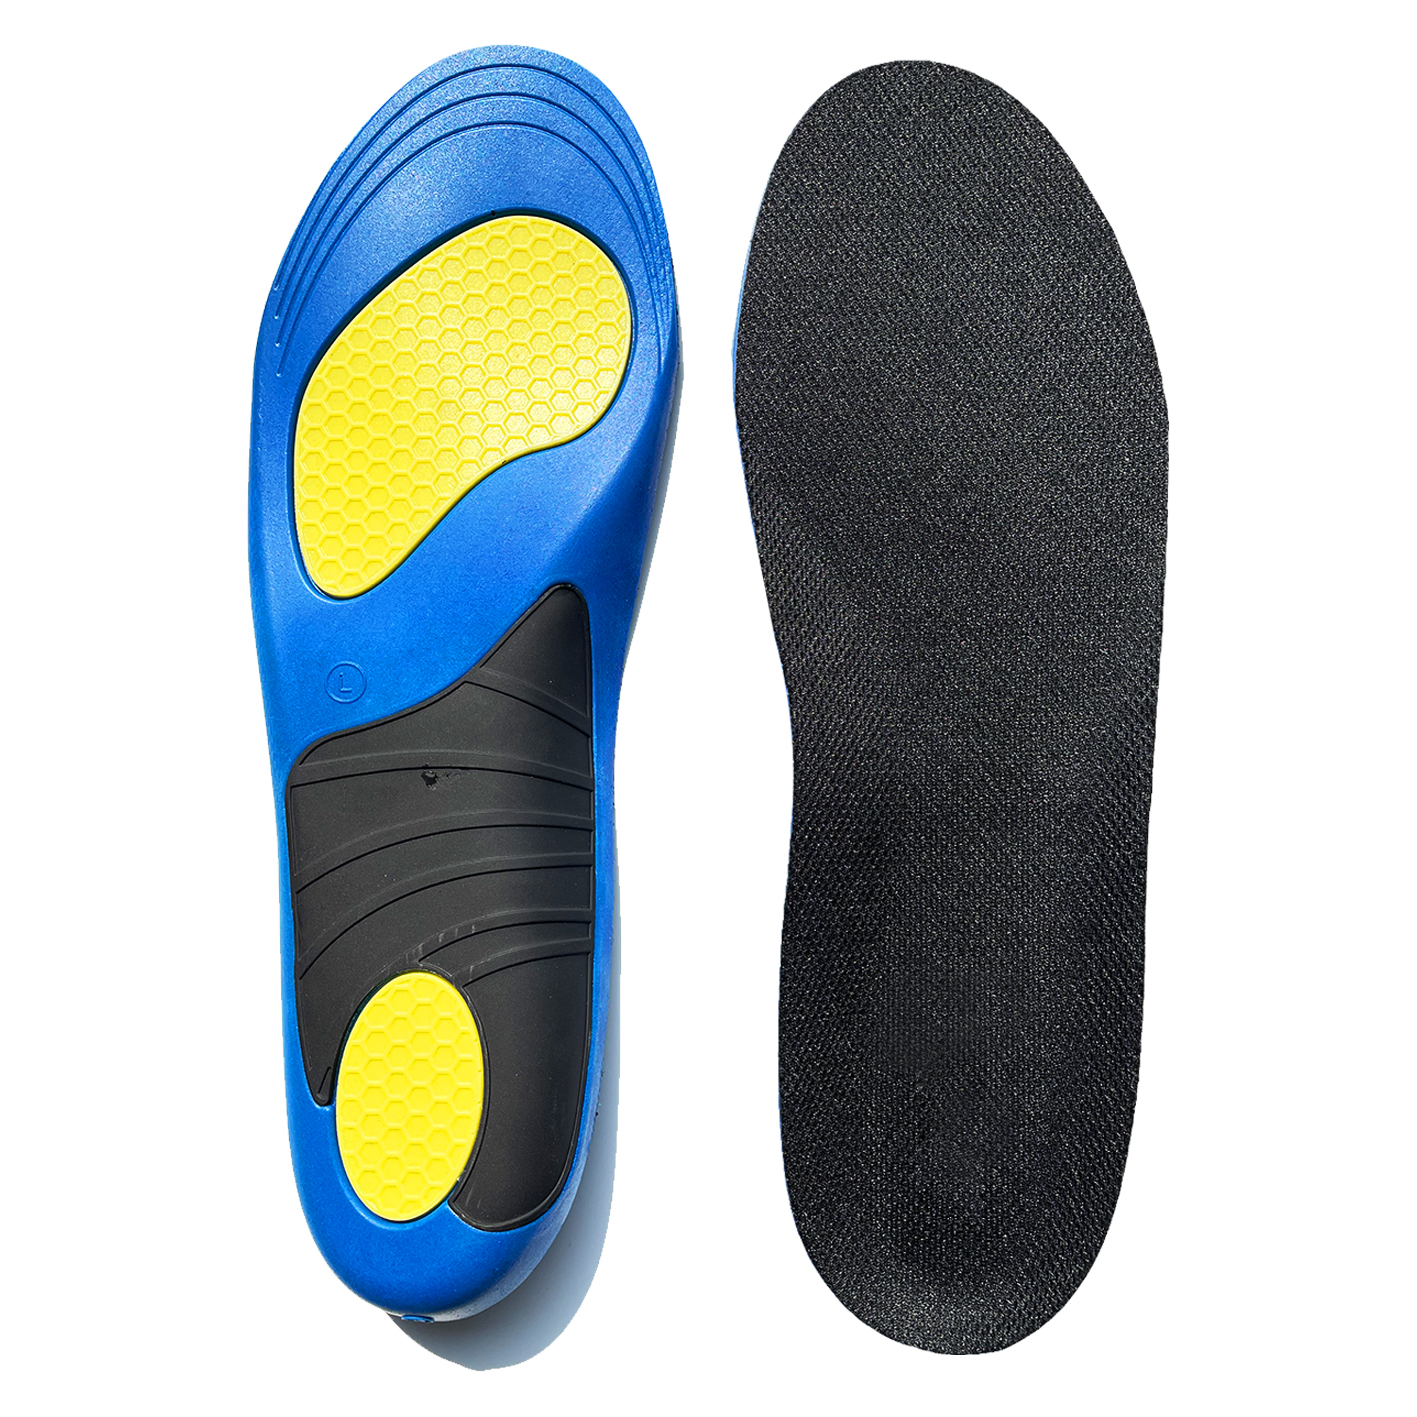 Arch support walking running insoles orthotic shoe inserts Featured Image